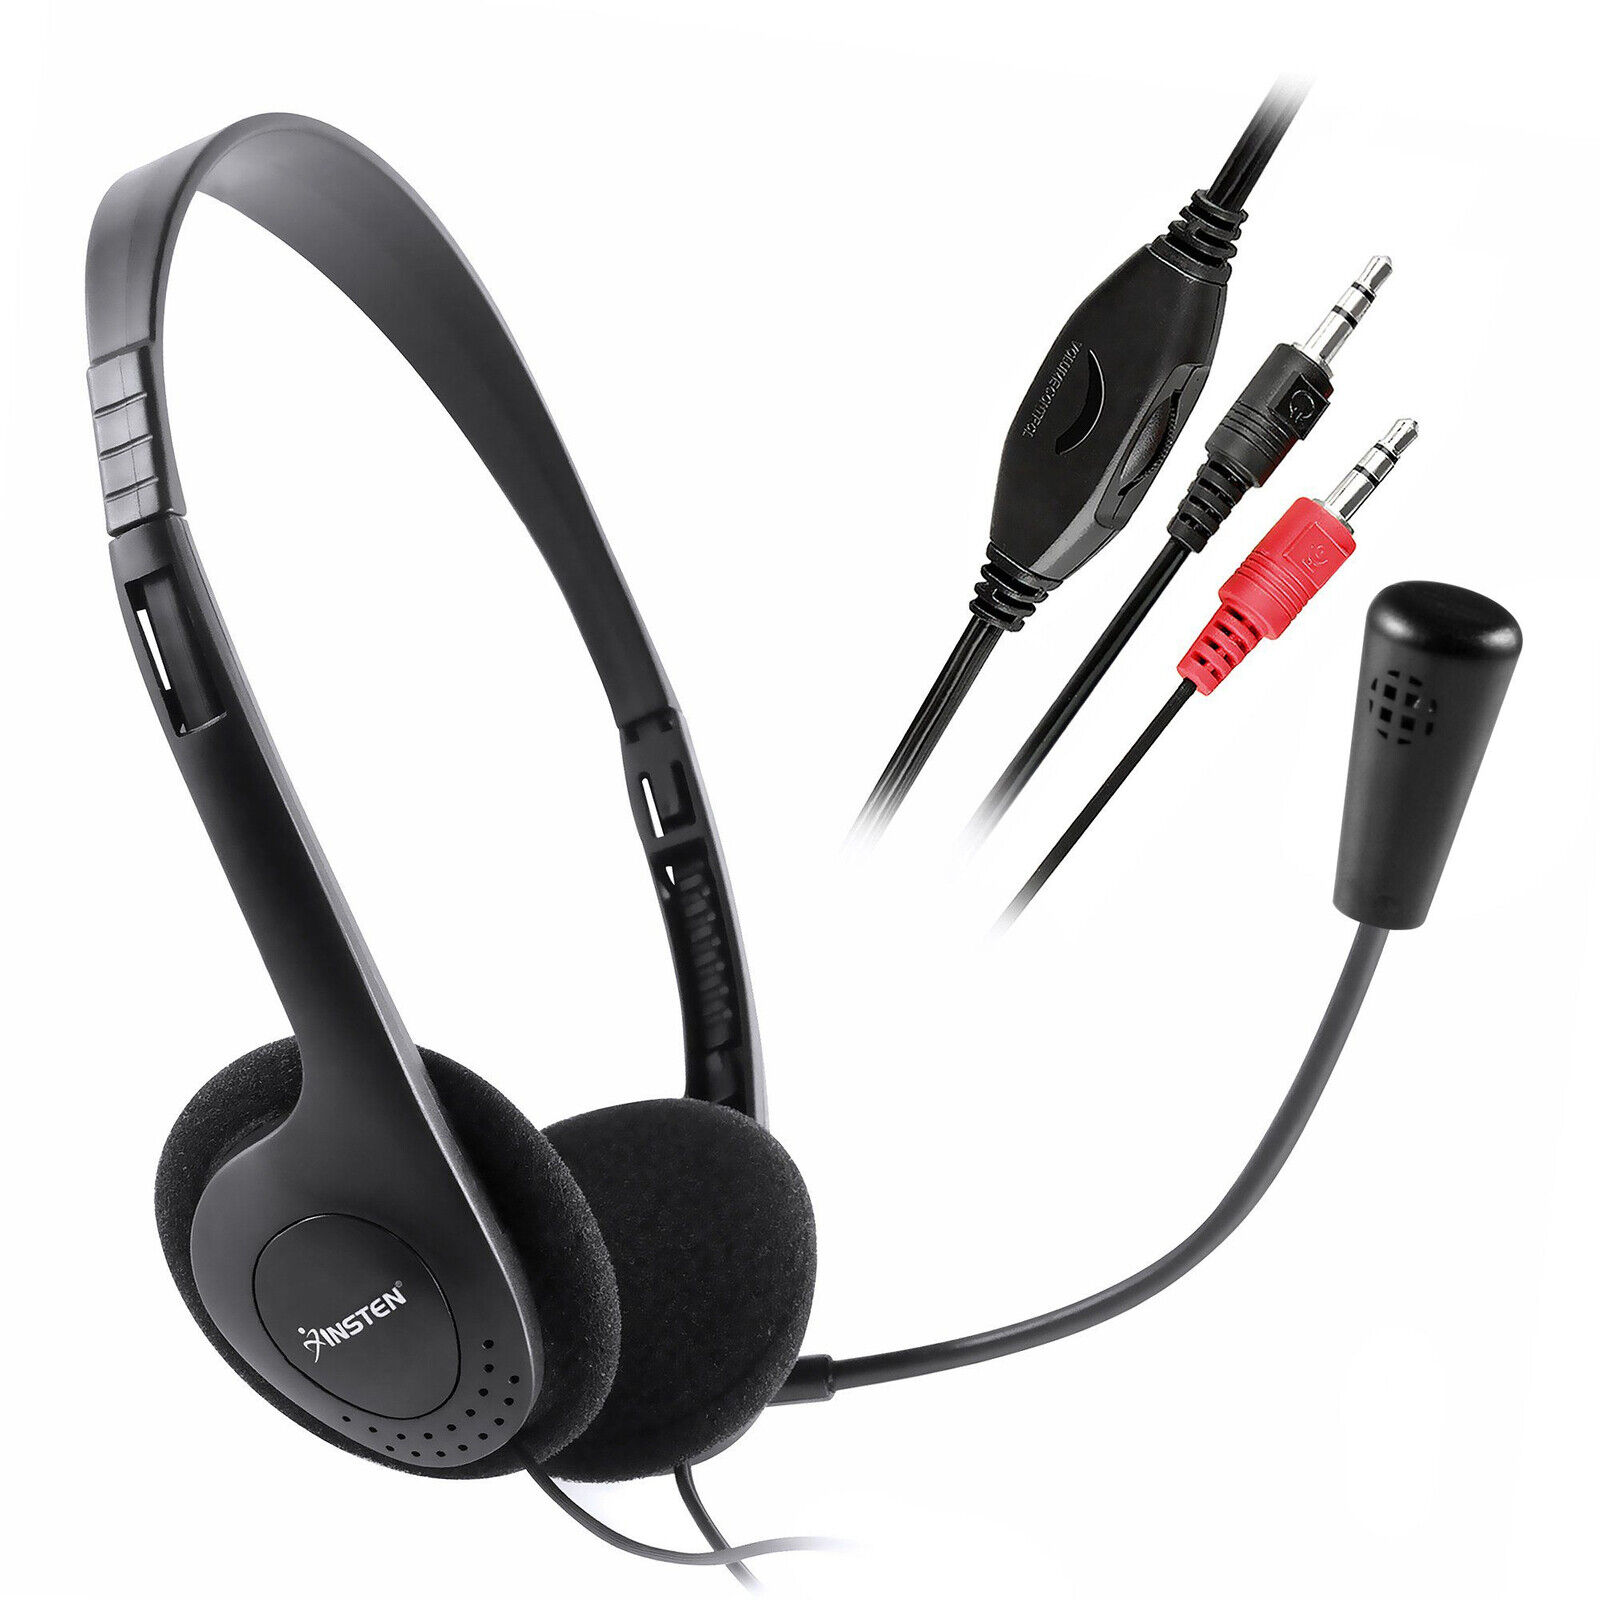 3.5mm Jack Wired Headsets Stereo Headphone with Mic for Computer PC Business Use